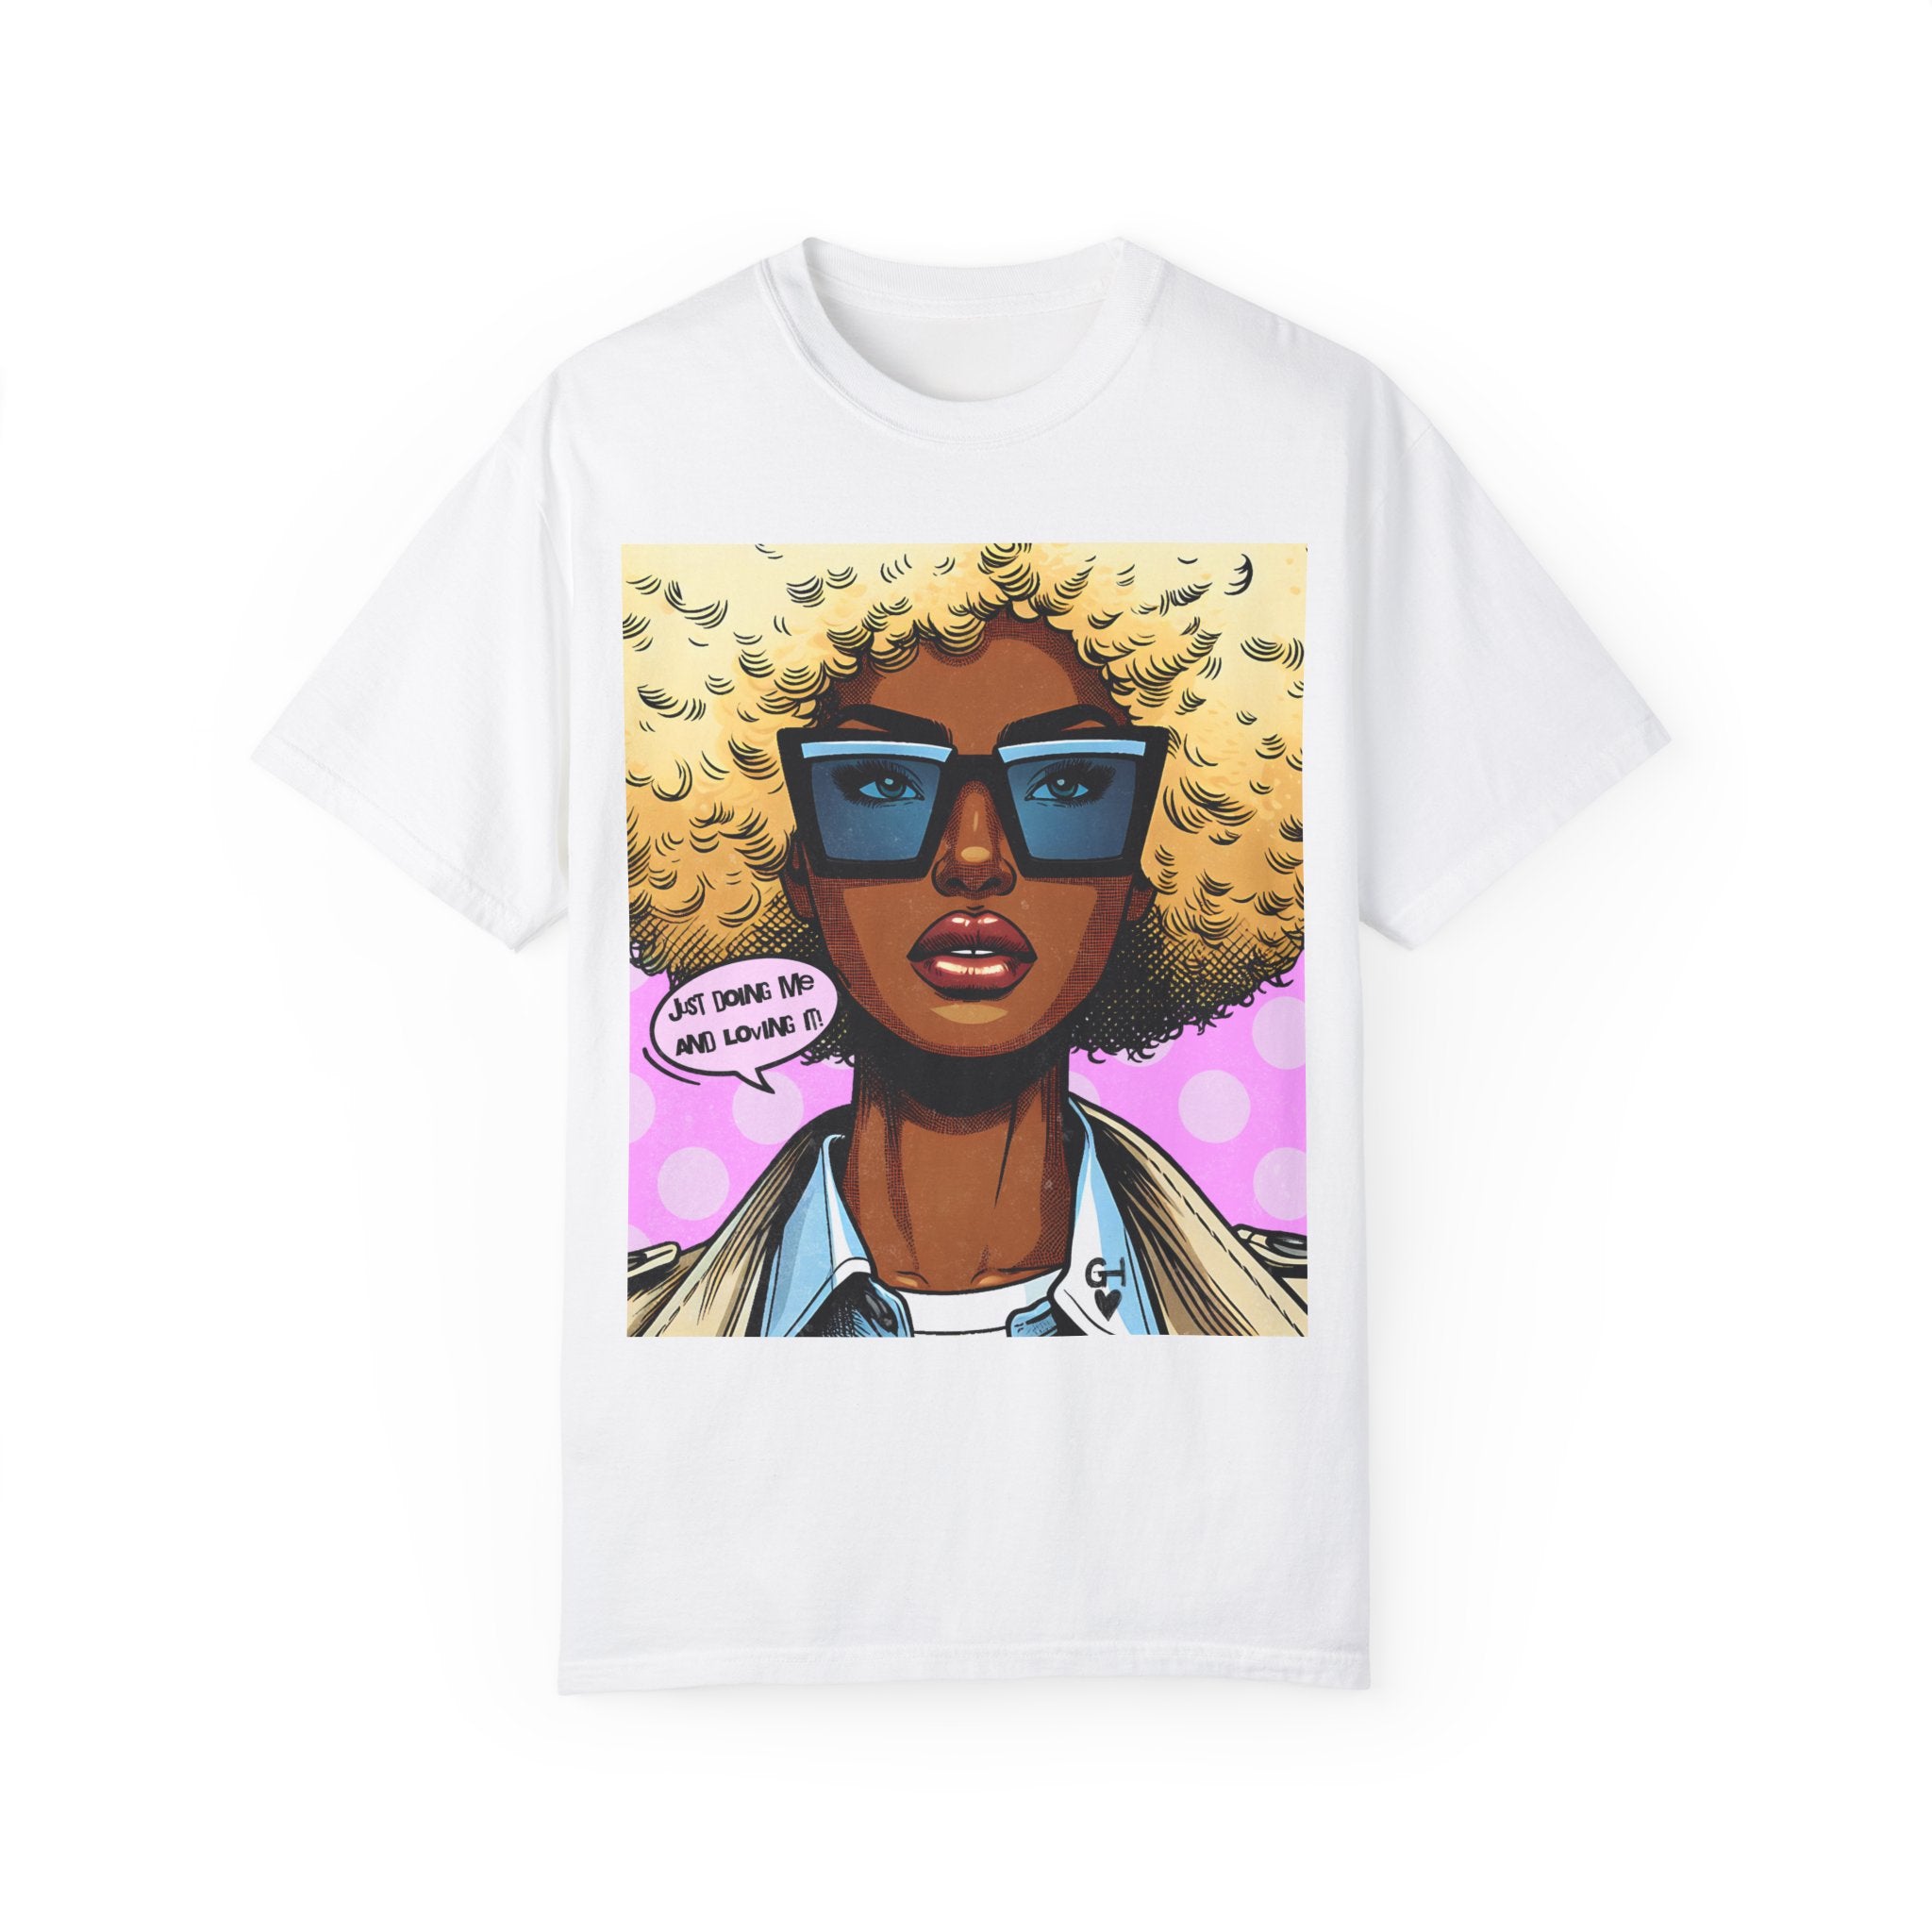 GOLDxTEAL's exclusive stylish comic cartoon graphic T-shirt.